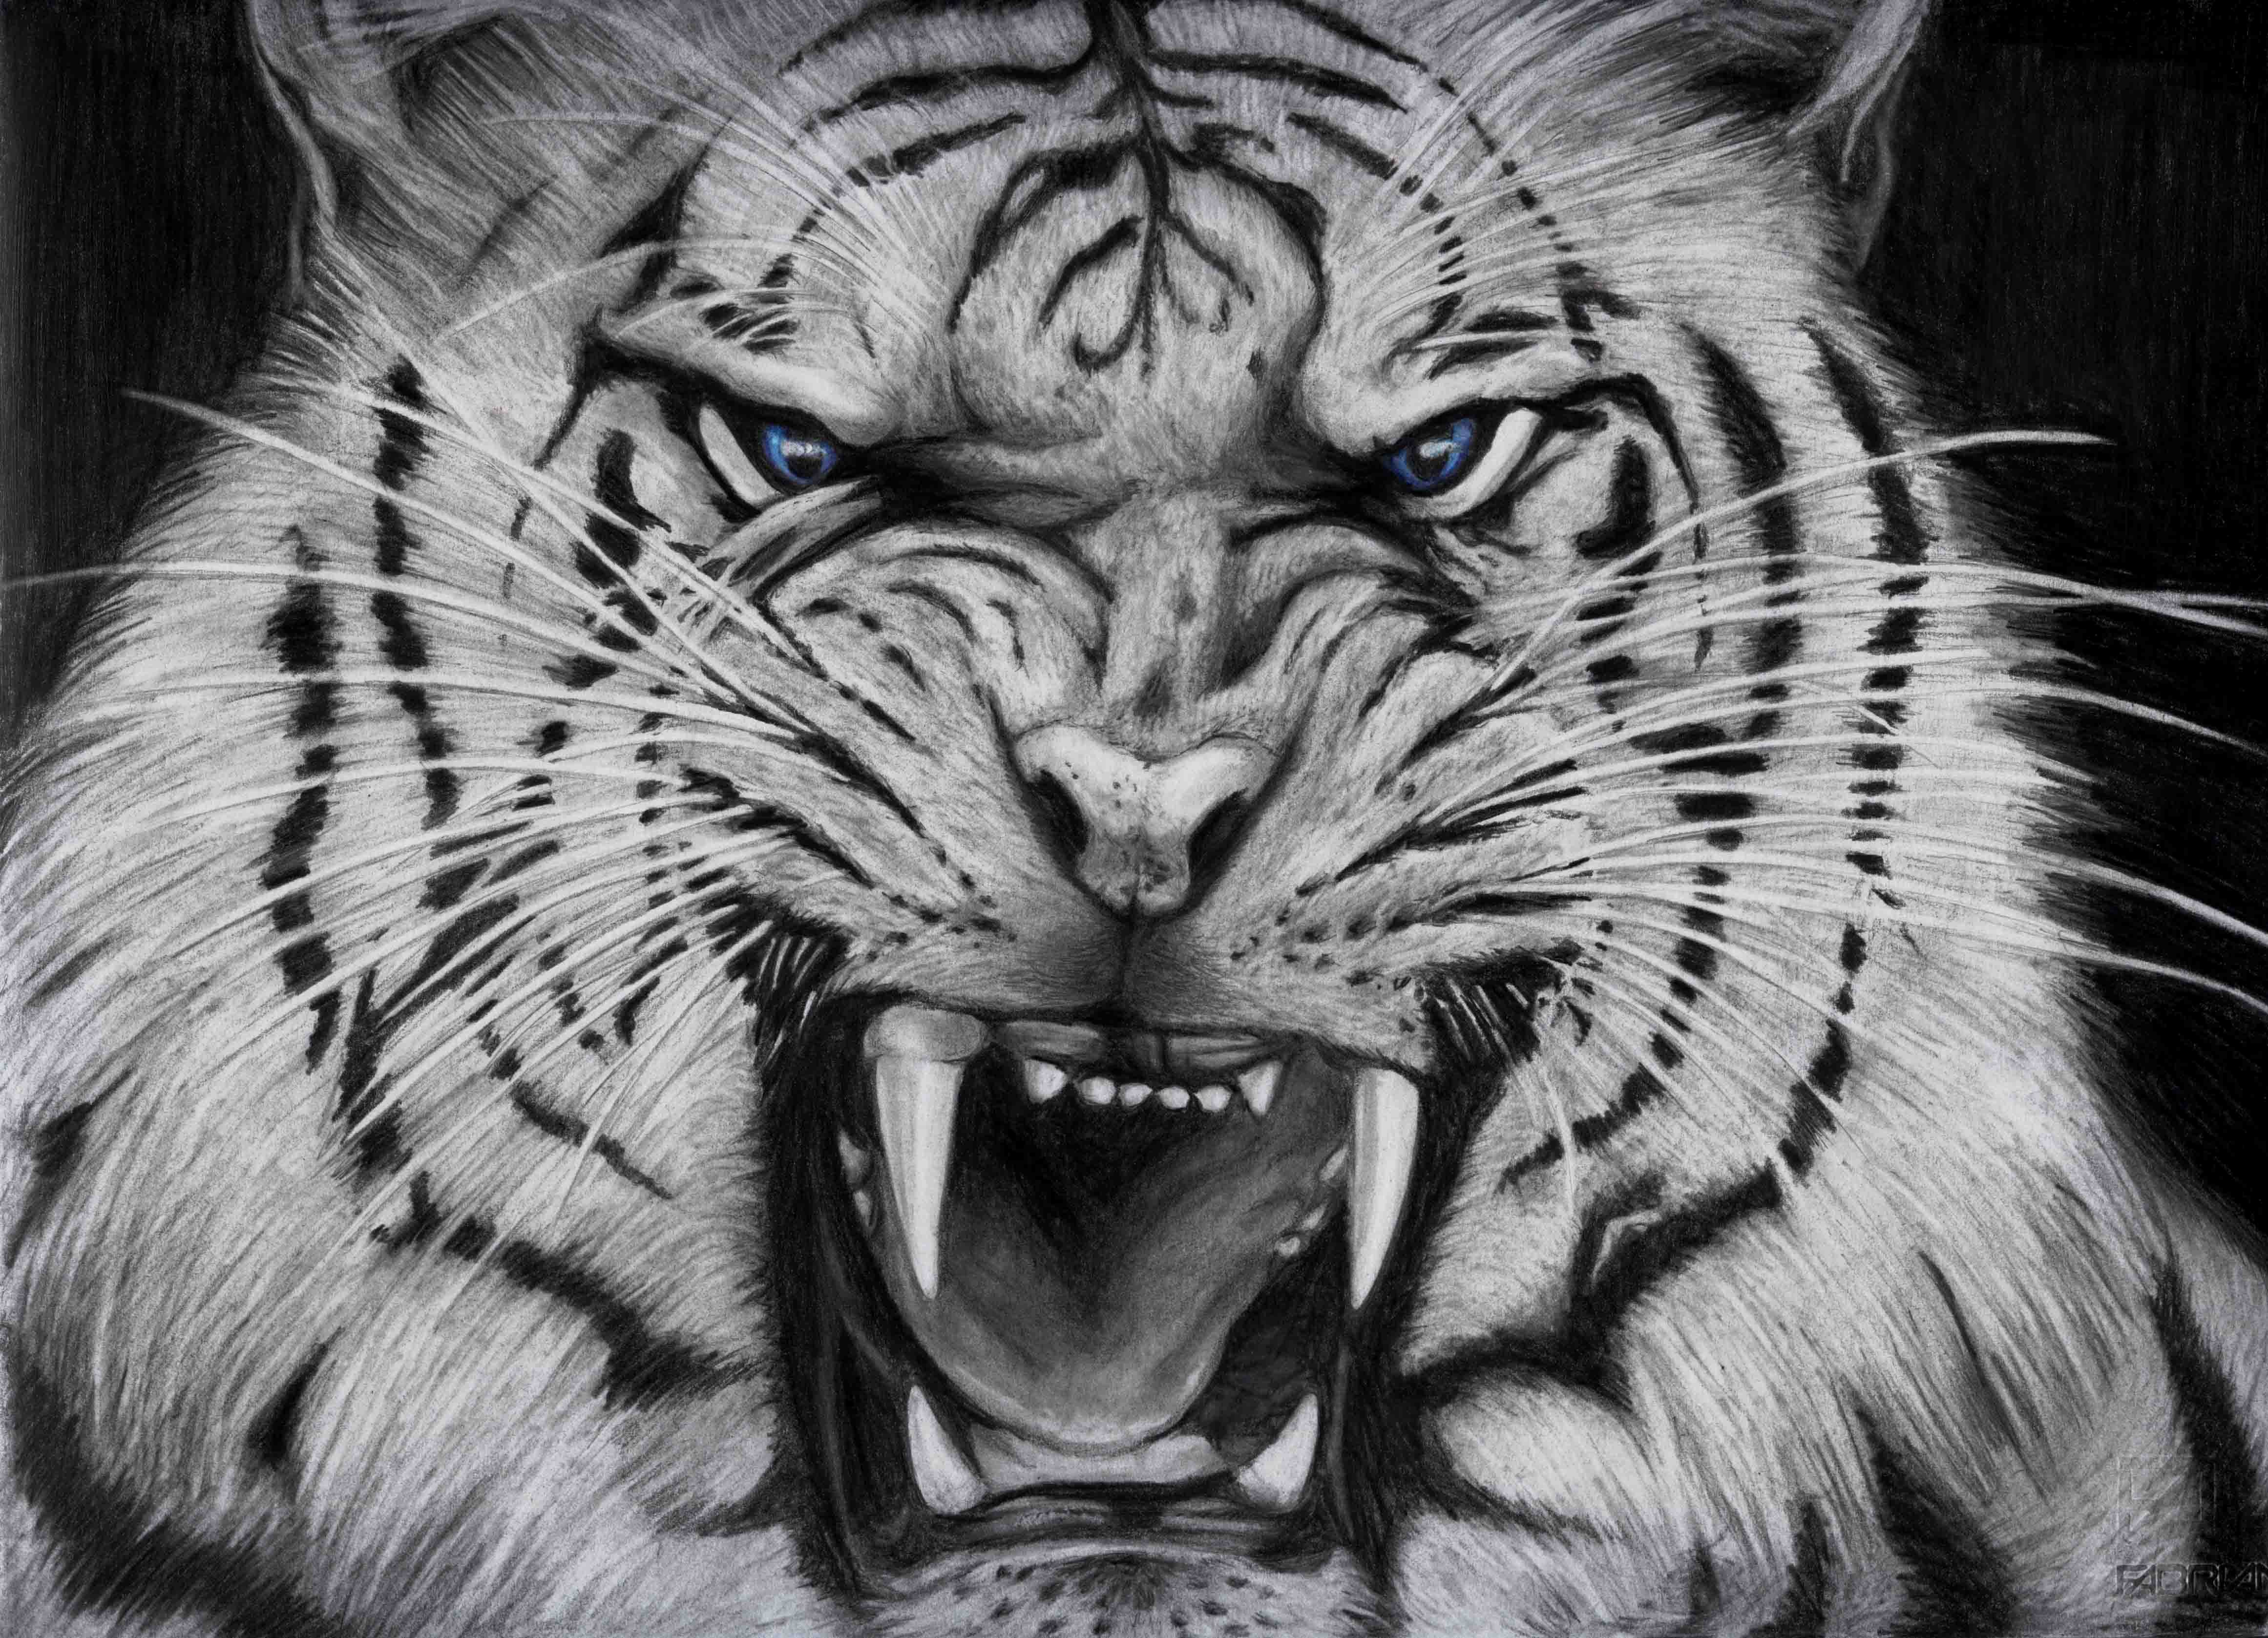 5400 Tiger Tattoo Stock Photos Pictures  RoyaltyFree Images  iStock  Tiger  tattoo vector Old school tiger tattoo